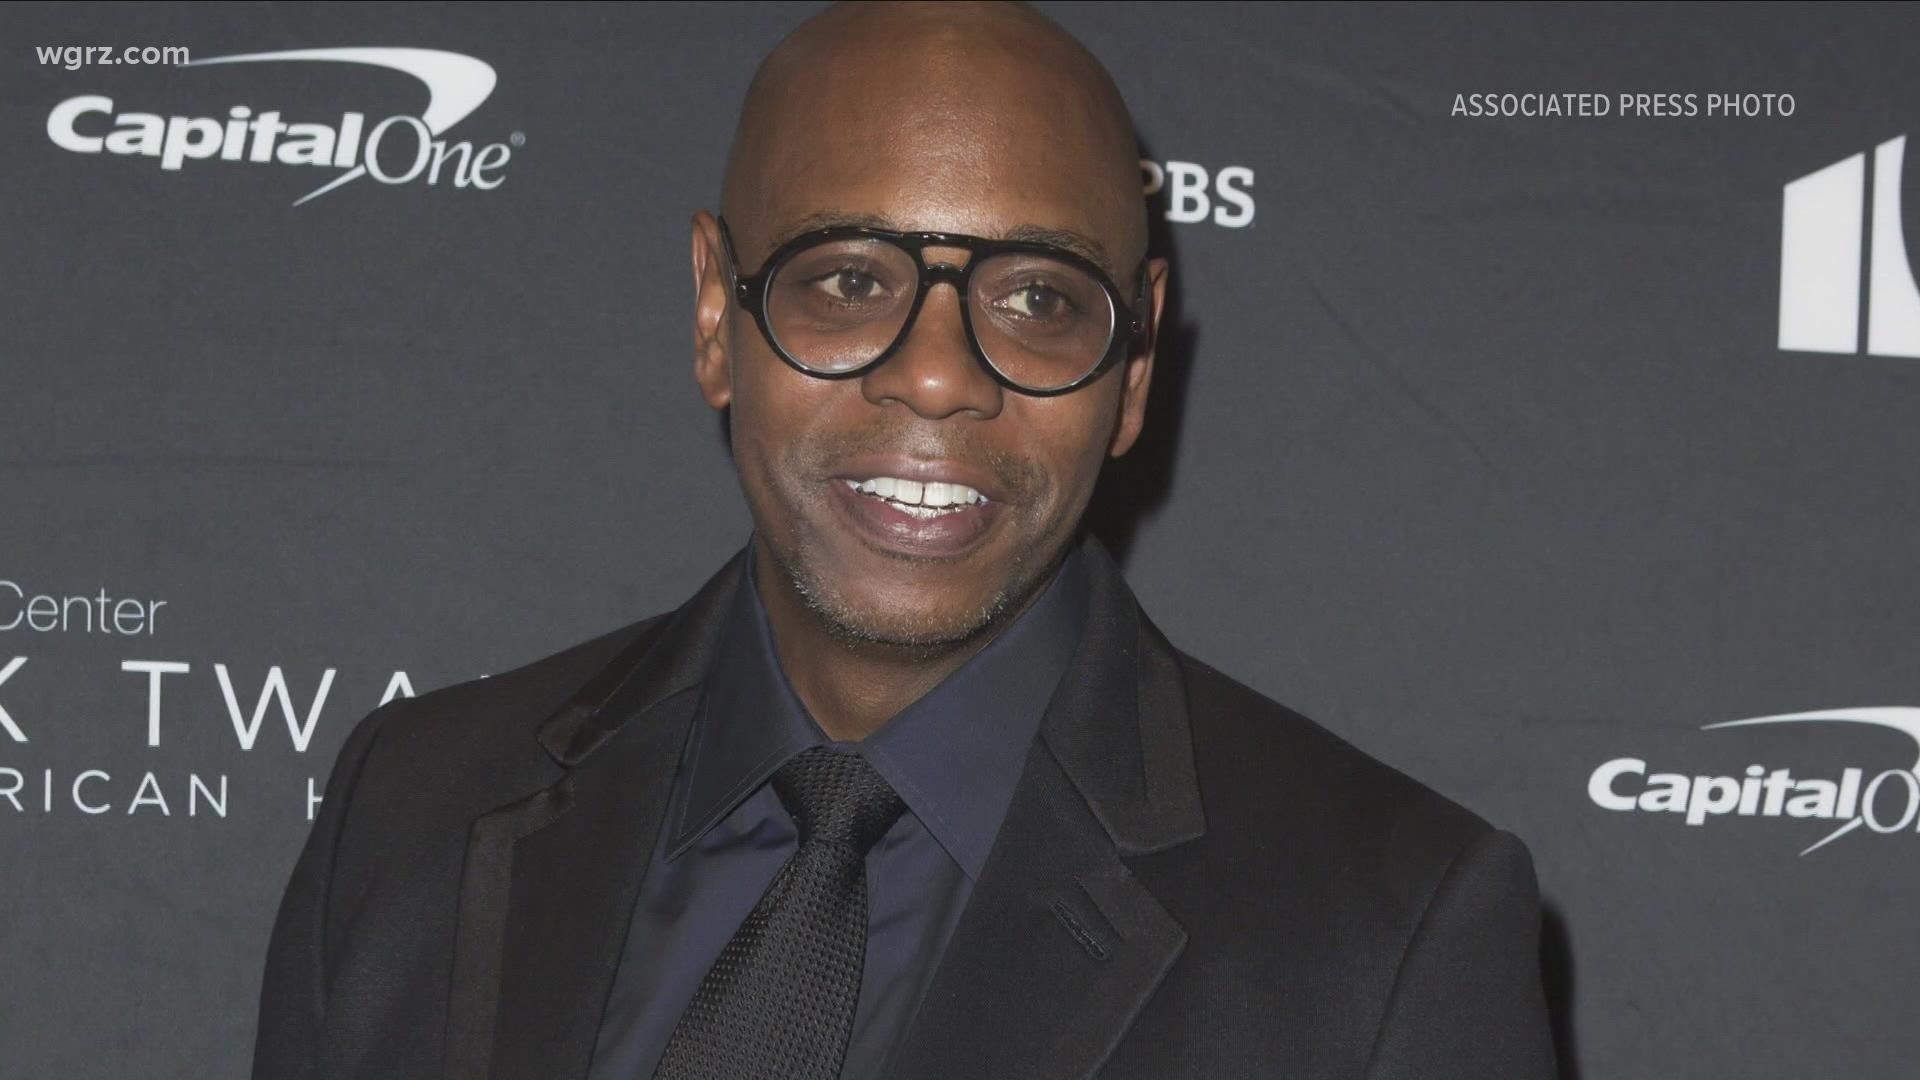 Chappelle donates show proceeds to victims families of Tops mass shooting